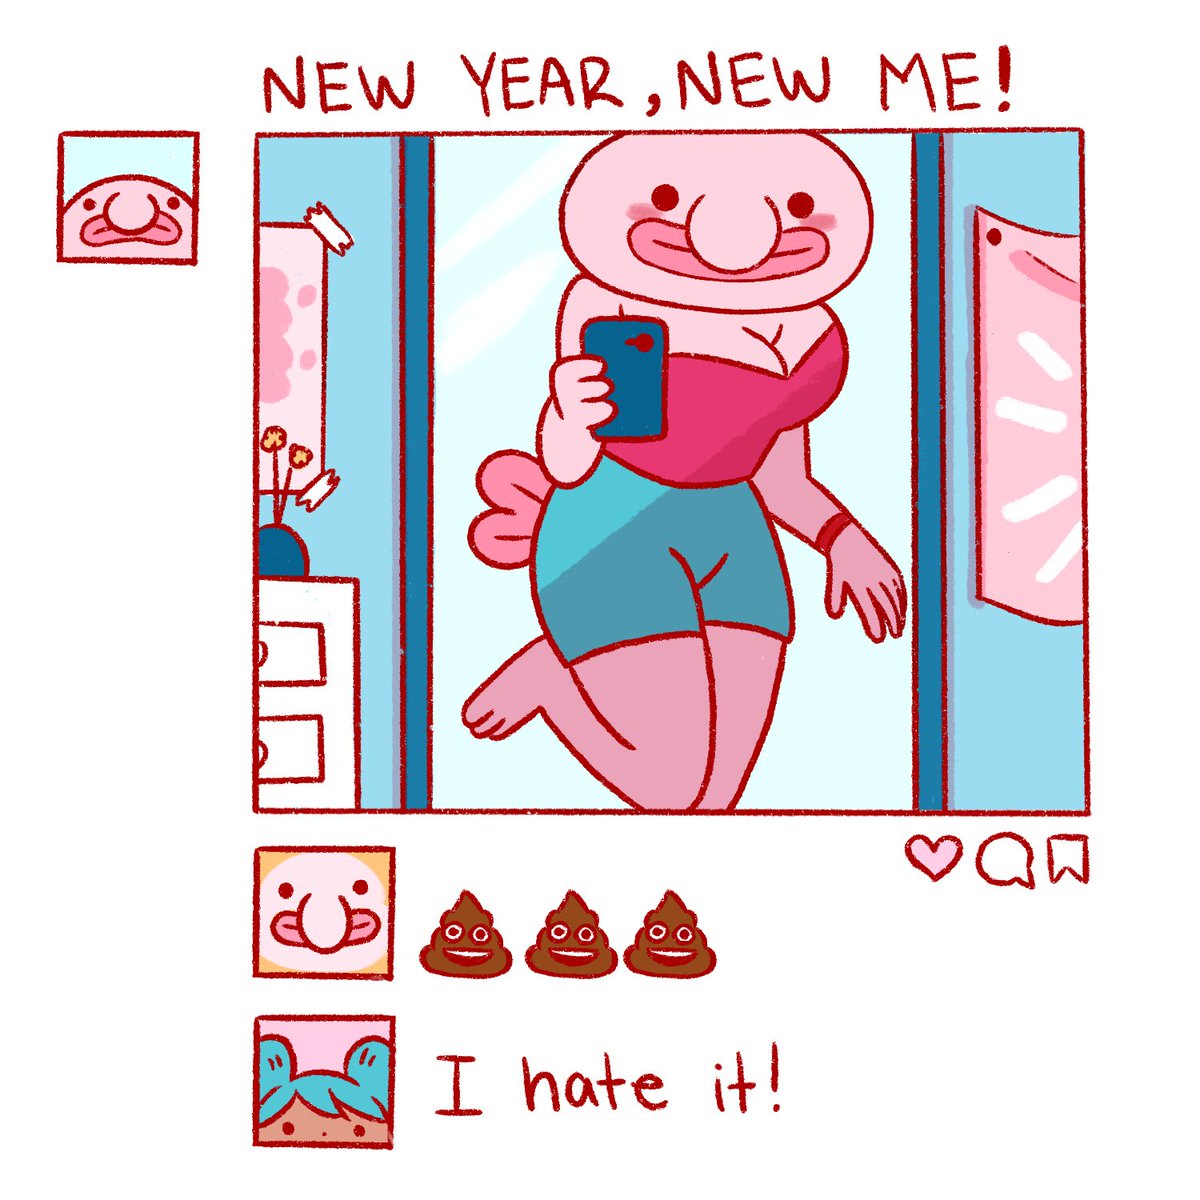 ✨New Year New Me✨ #transformationday #newyearresolution #transformations #selfie #cute #inspiration #newyearnewme